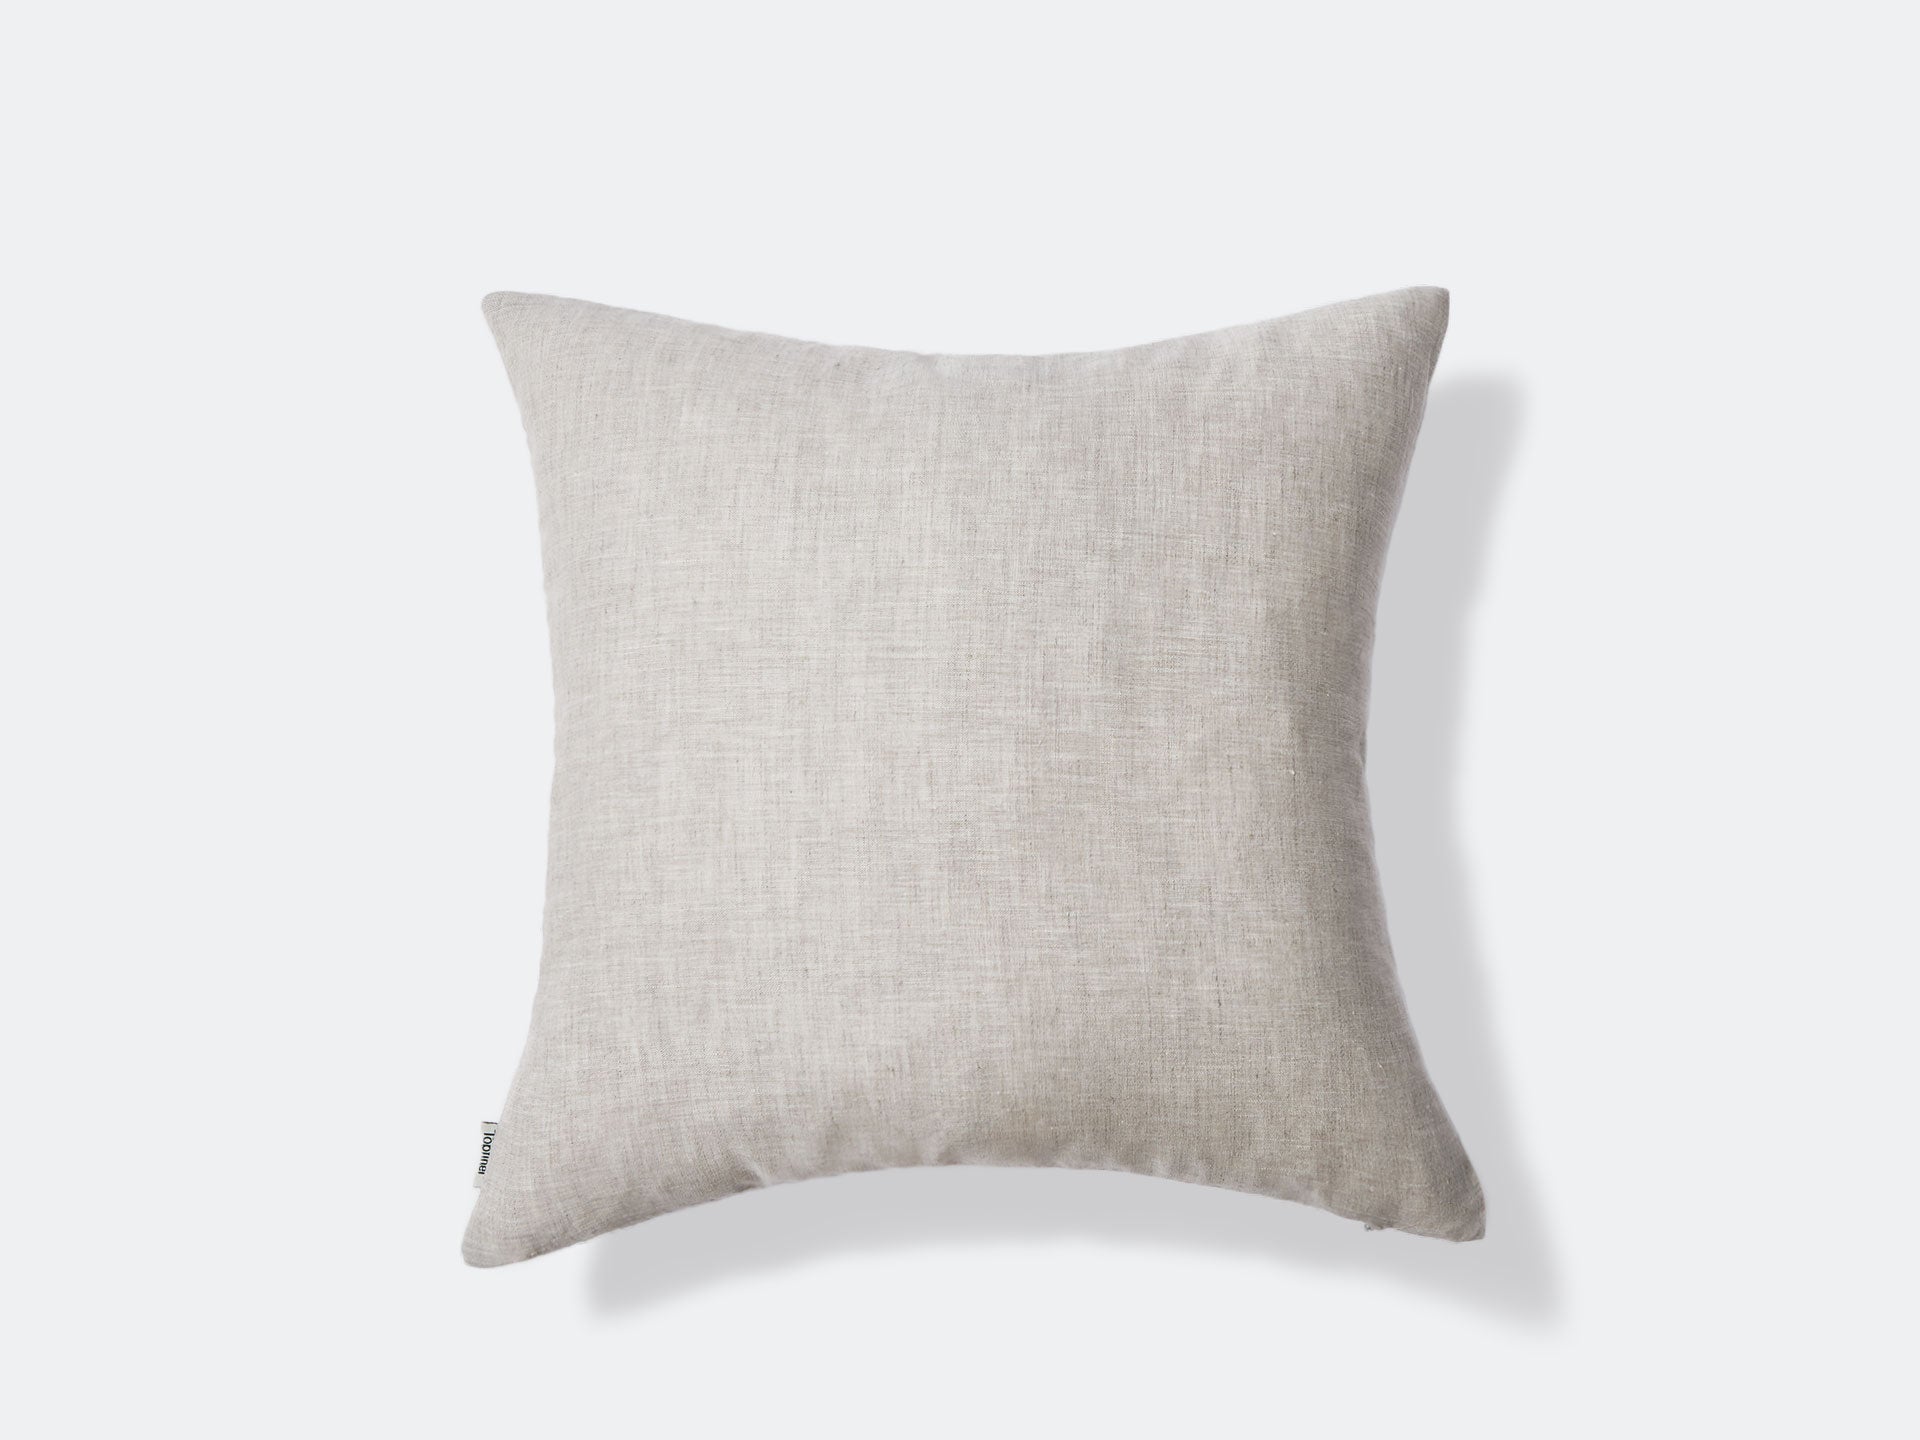 Vintage Solid Linen Decorative Throw Pillow Cover